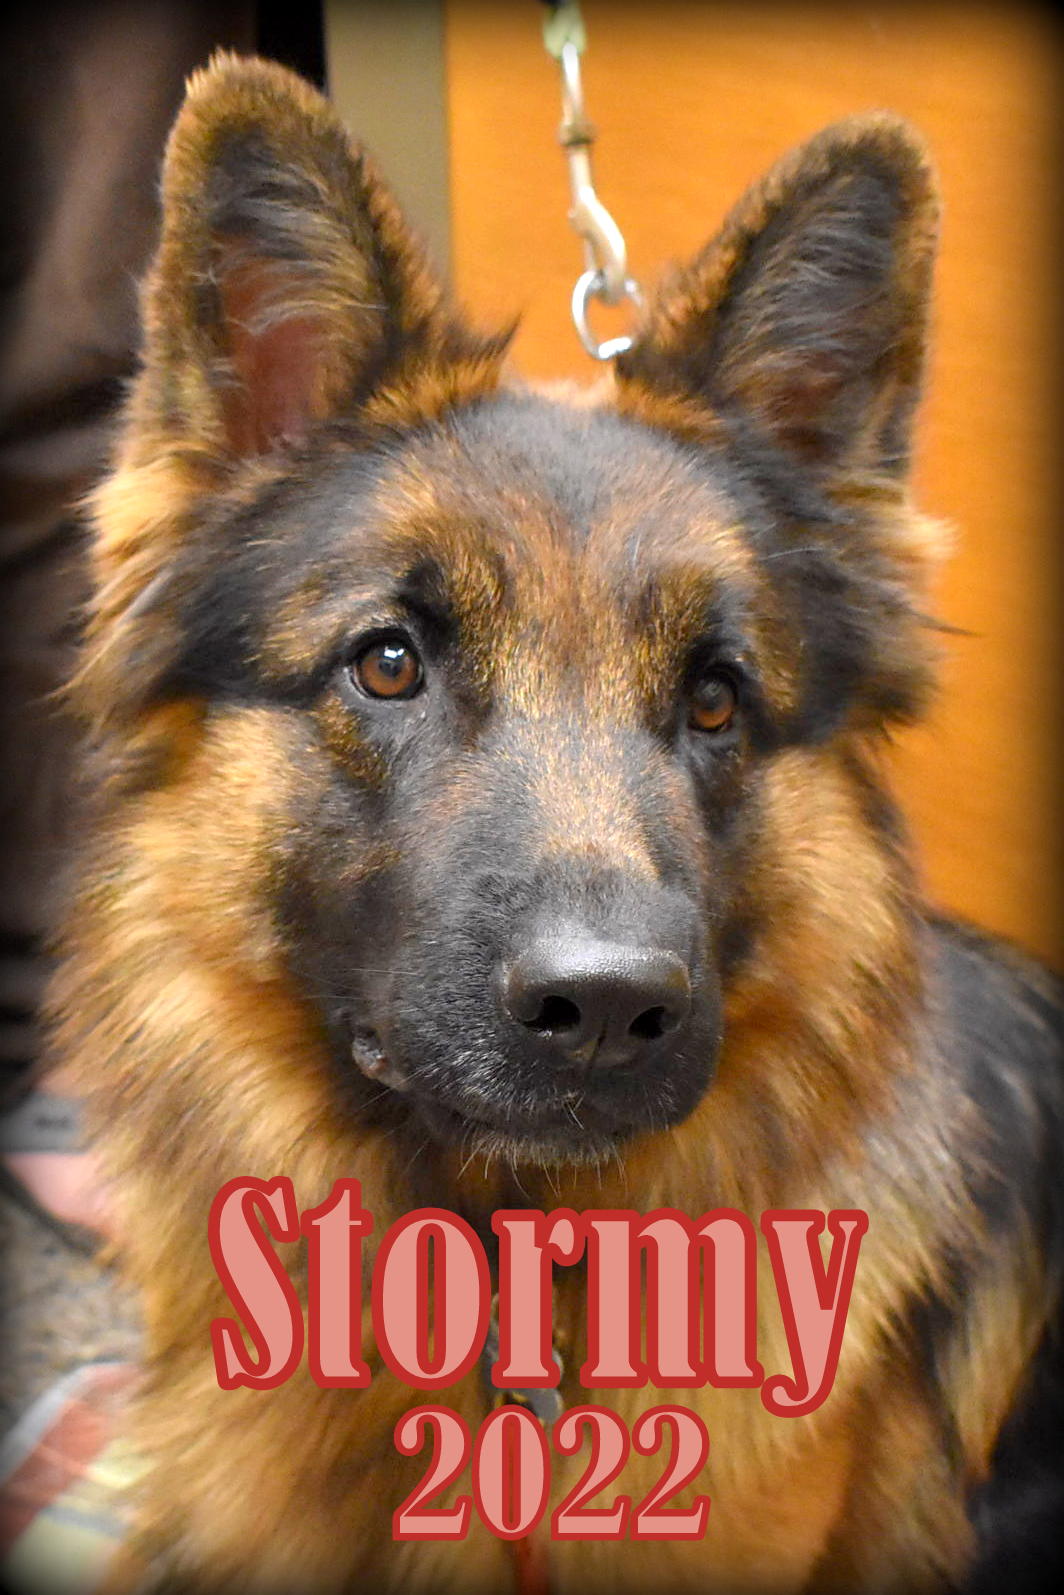 Stormy needs to be rehomed  Stormy needs to be rehomed to good home. Stormy is 2.4 year old pure bread German Shepherd with papers, shots etc. She has wonderful disposition. Call 208-666-4003 or 208-666-1596 CDA